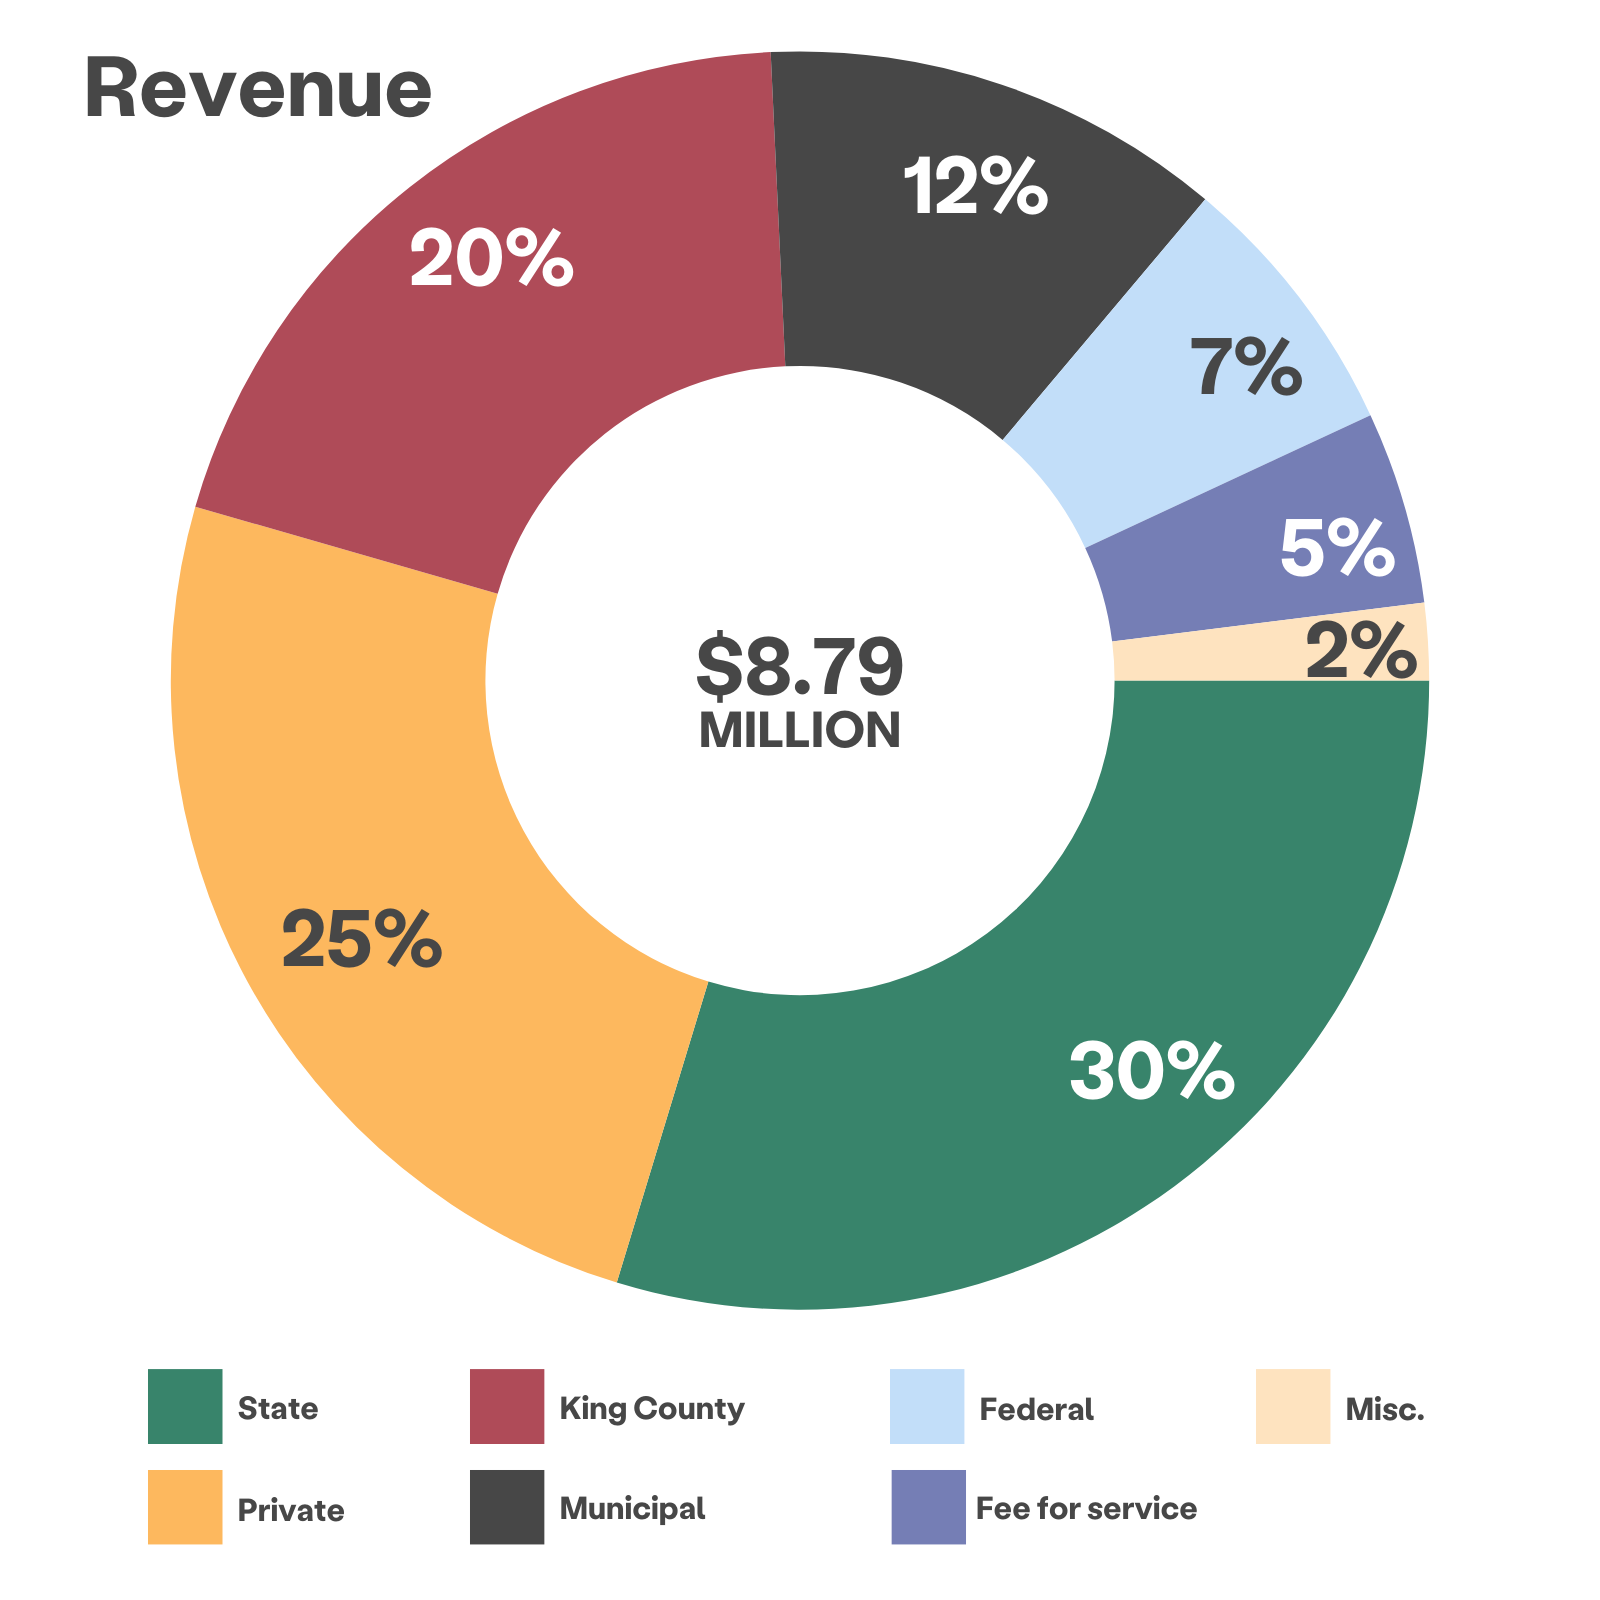 Revenue wheel showing $8.79 million total income: 30% from state sources, 26% from private fundraising, 20% King County, 12% municipal, 7% federal, 5% fee for service and 2% misc. income.